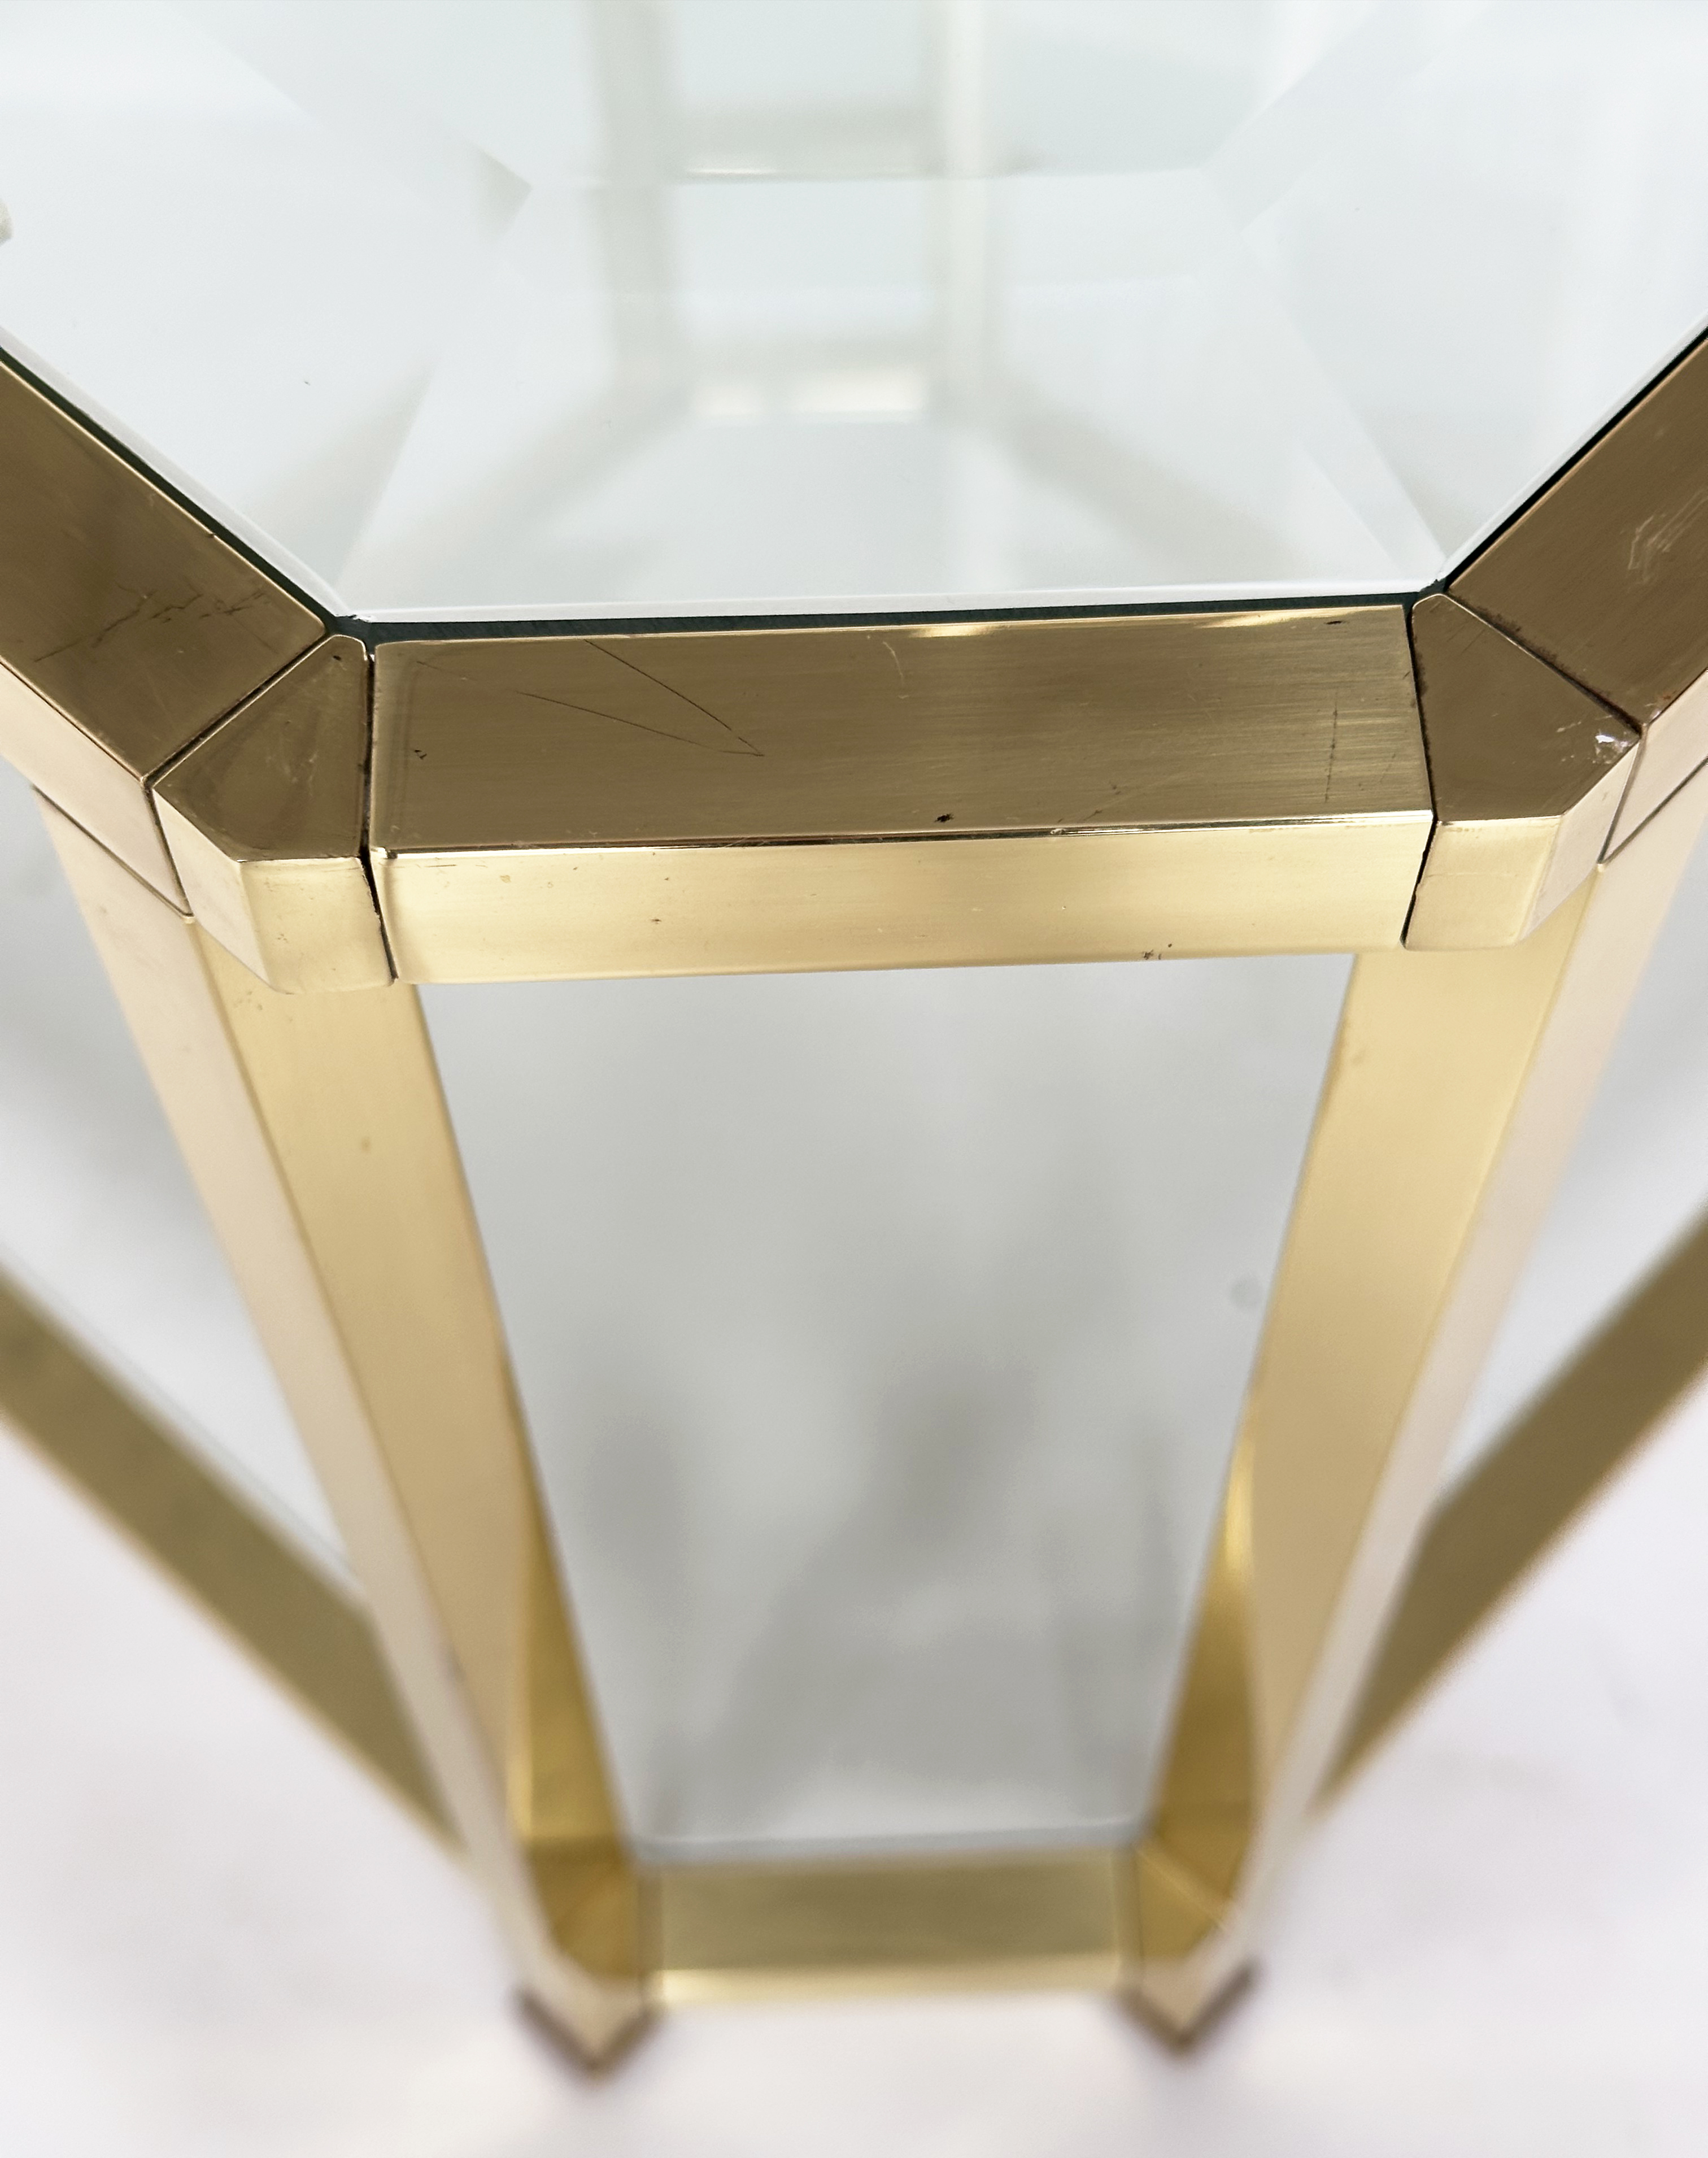 LAMP TABLES, a pair, 1970's gilt metal, square with canted corners and bevelled glass and glazed - Image 5 of 8